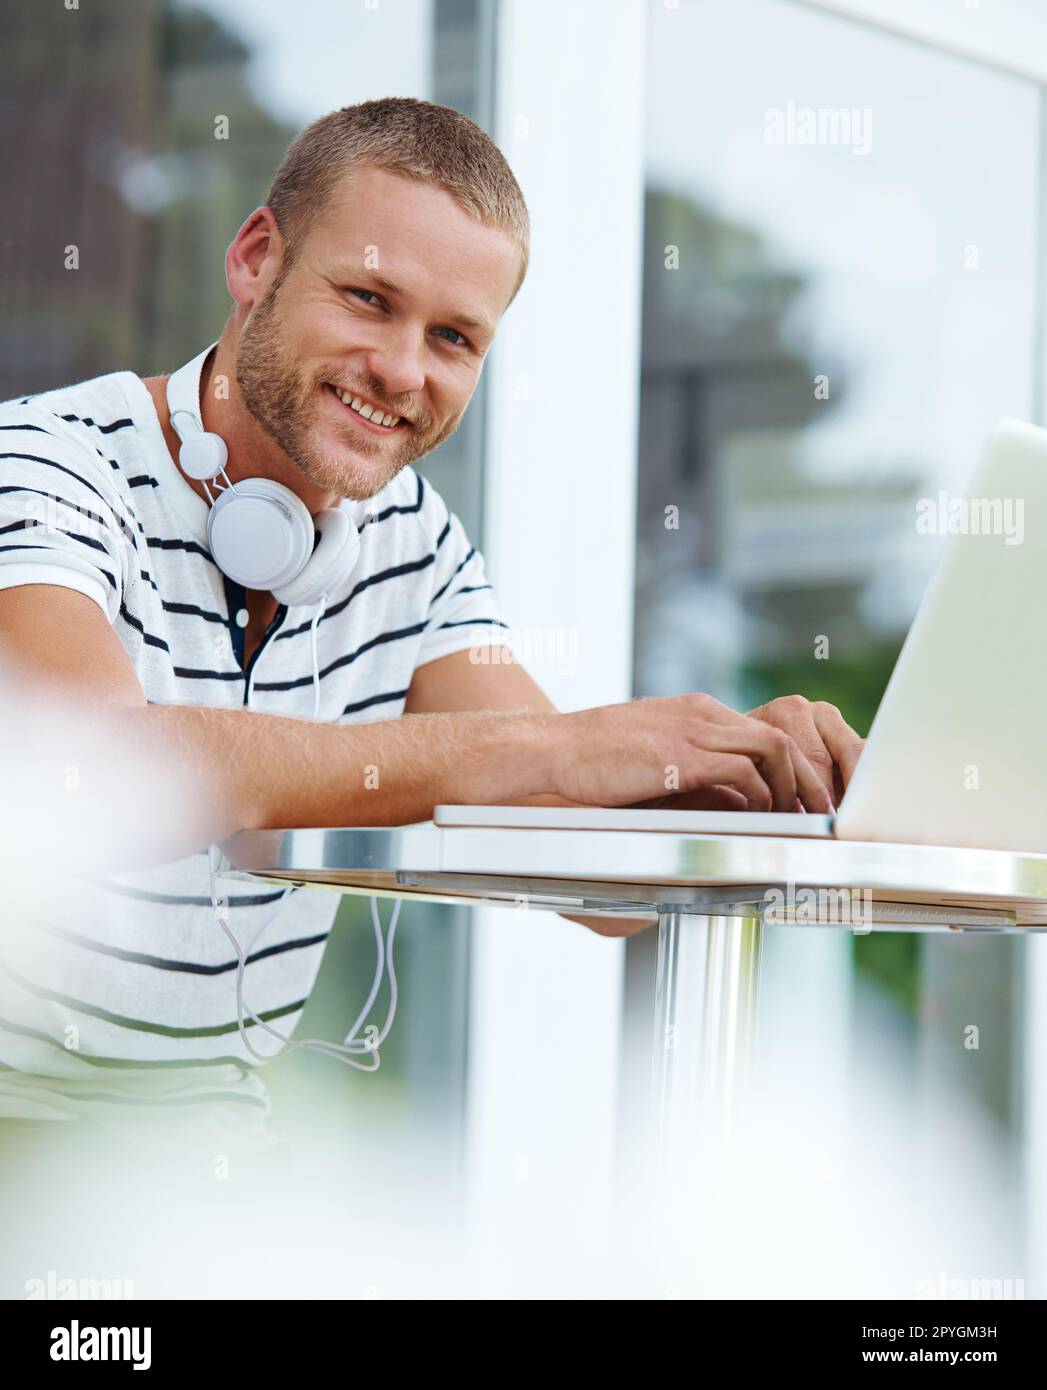 Taking his work wherever he may go. Portrait of a handsome young man working outside on a laptop. Stock Photo